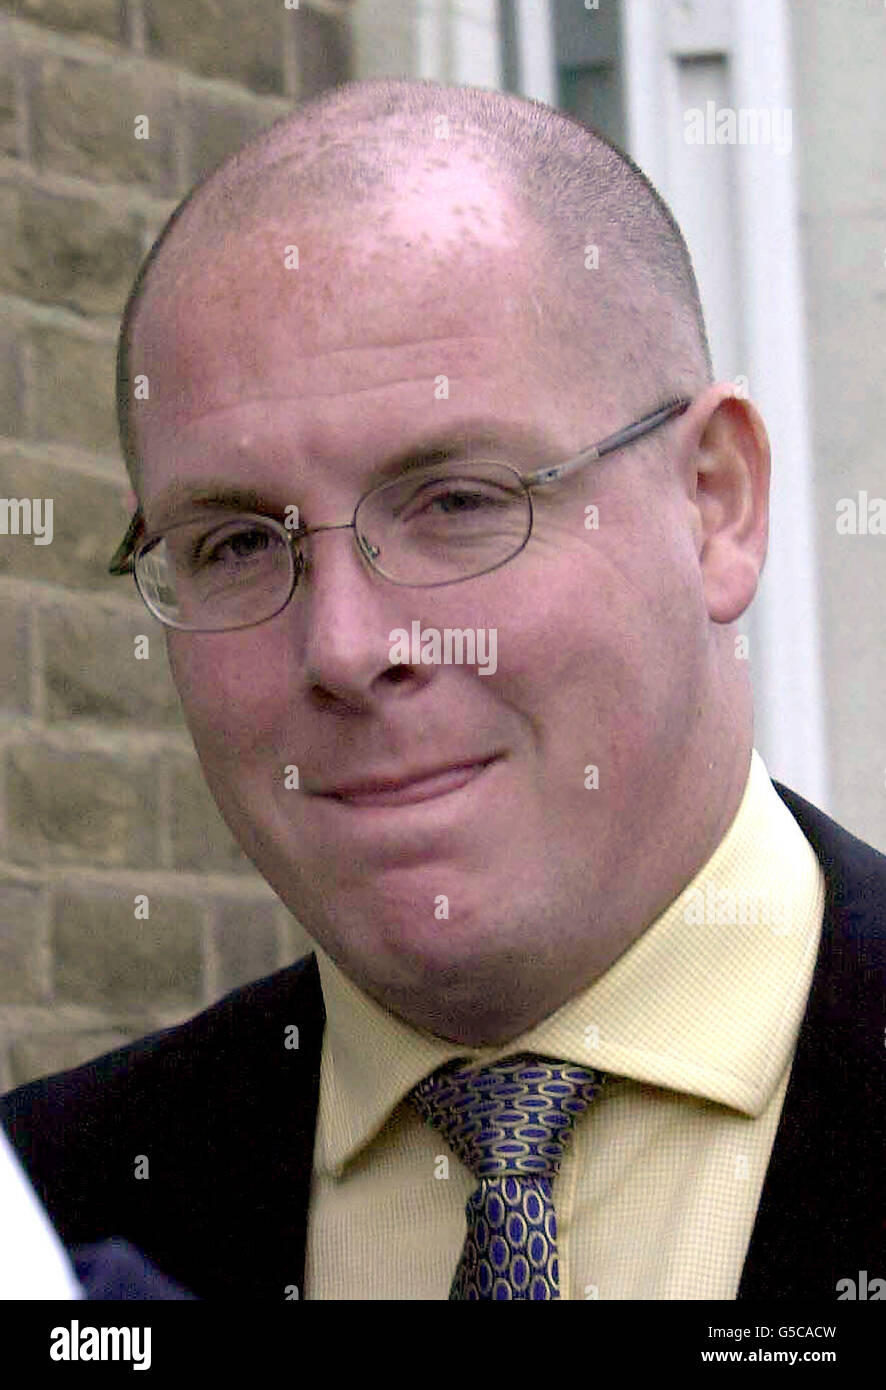 Rogue Trader Nick Leeson arrives at Watford Magistrates court charged with drink driving. The 34-year-old, who spent four and half years in a Singapore jail after bringing down Barings Bank in 1995, was arrested after being stopped in Watford. *Leeson, whose story was turned into the film Rogue Trader, was running in the London Marathon, but missed the start because of his arrest. Stock Photo